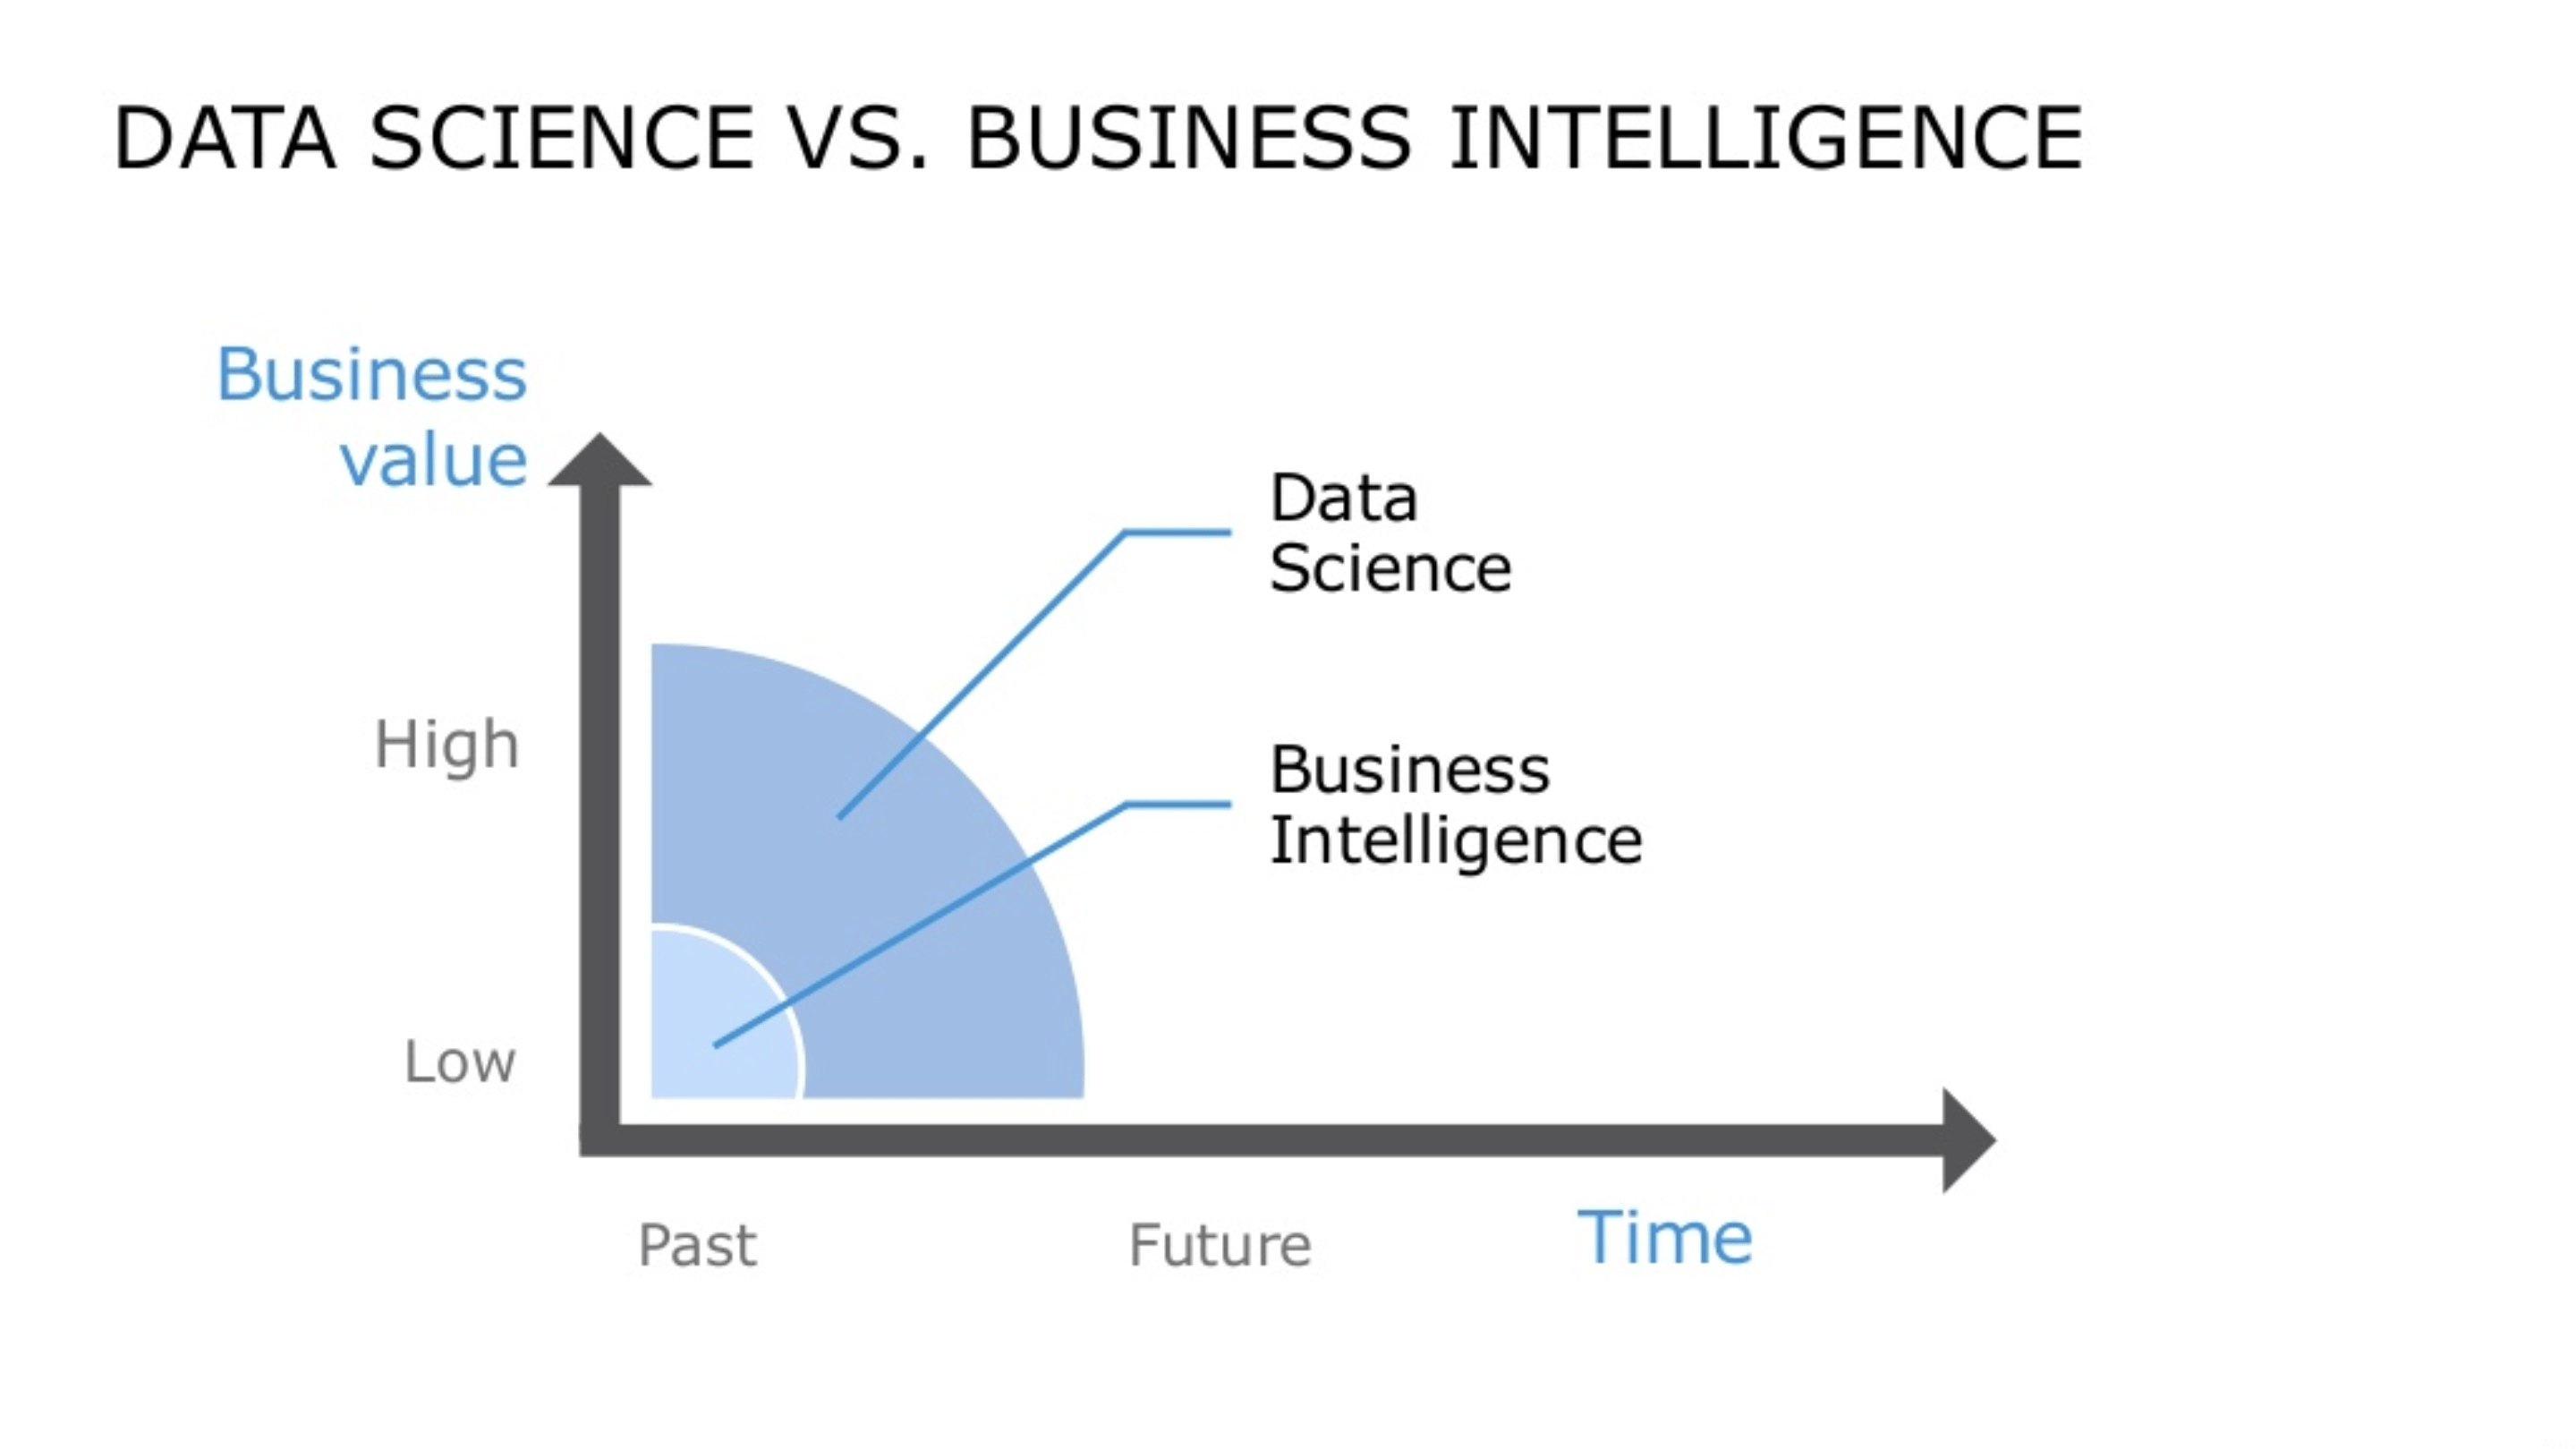 Business intelligence is the first step towards a broader data science practice